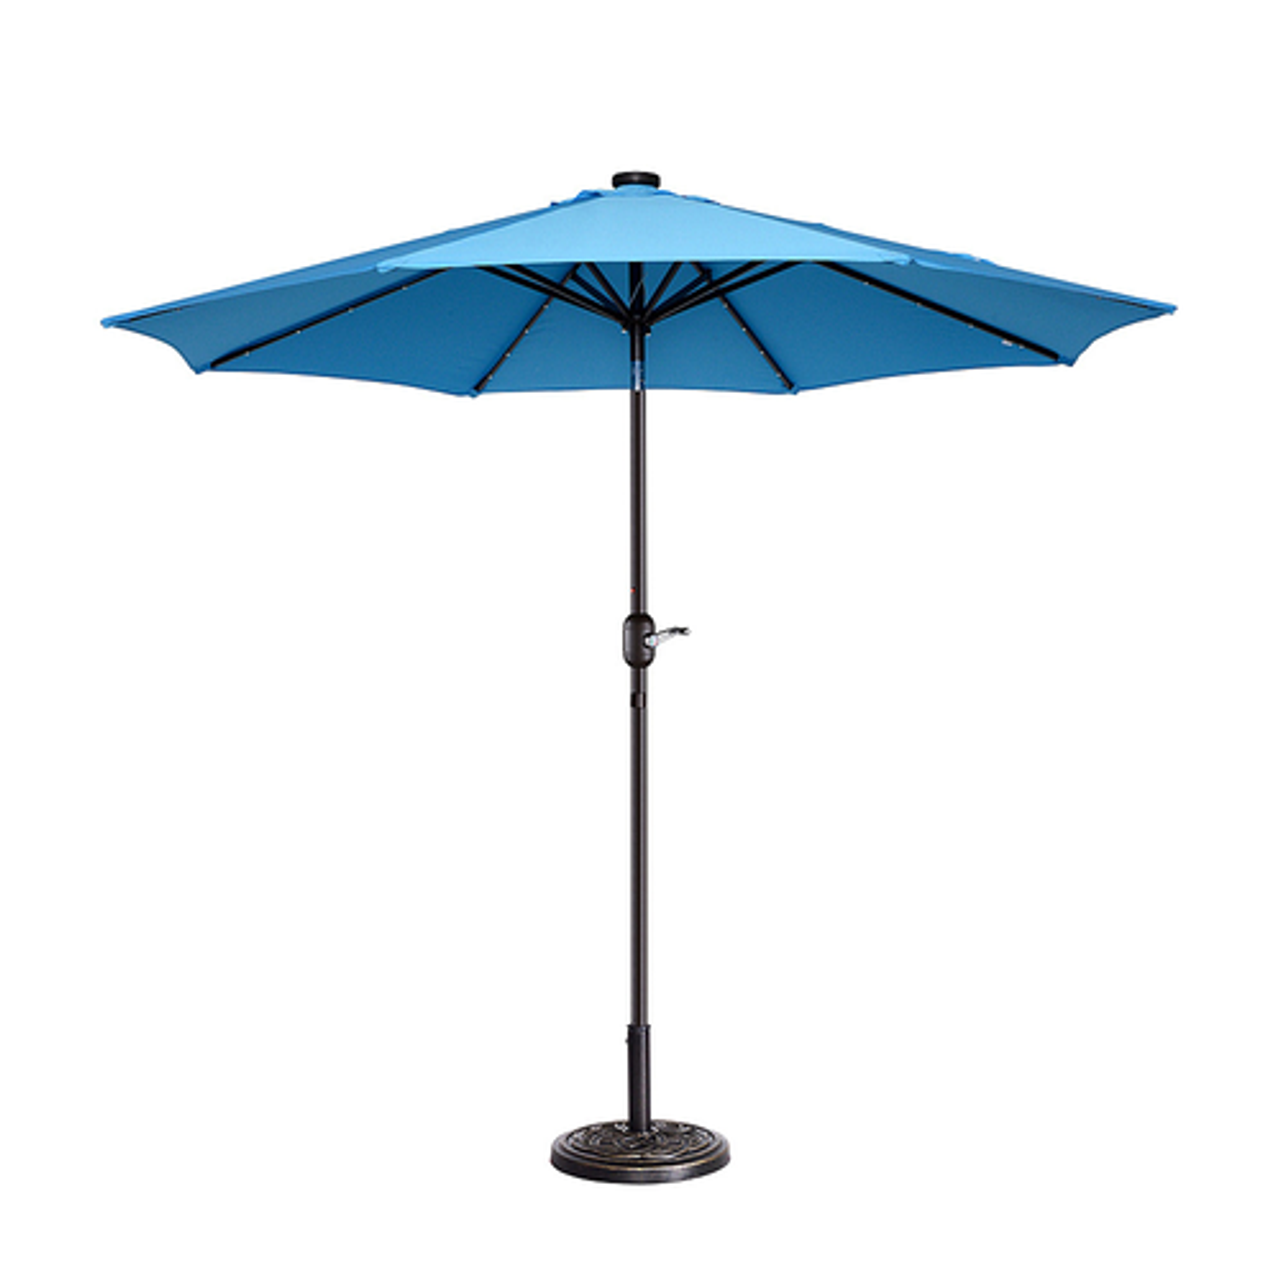 Nature Spring - 9' LED Lighted Outdoor Patio Umbrella with 8 Steel Ribs and Push Button Tilt, Solar Powered Market Umbrella by (Blue) - Blue